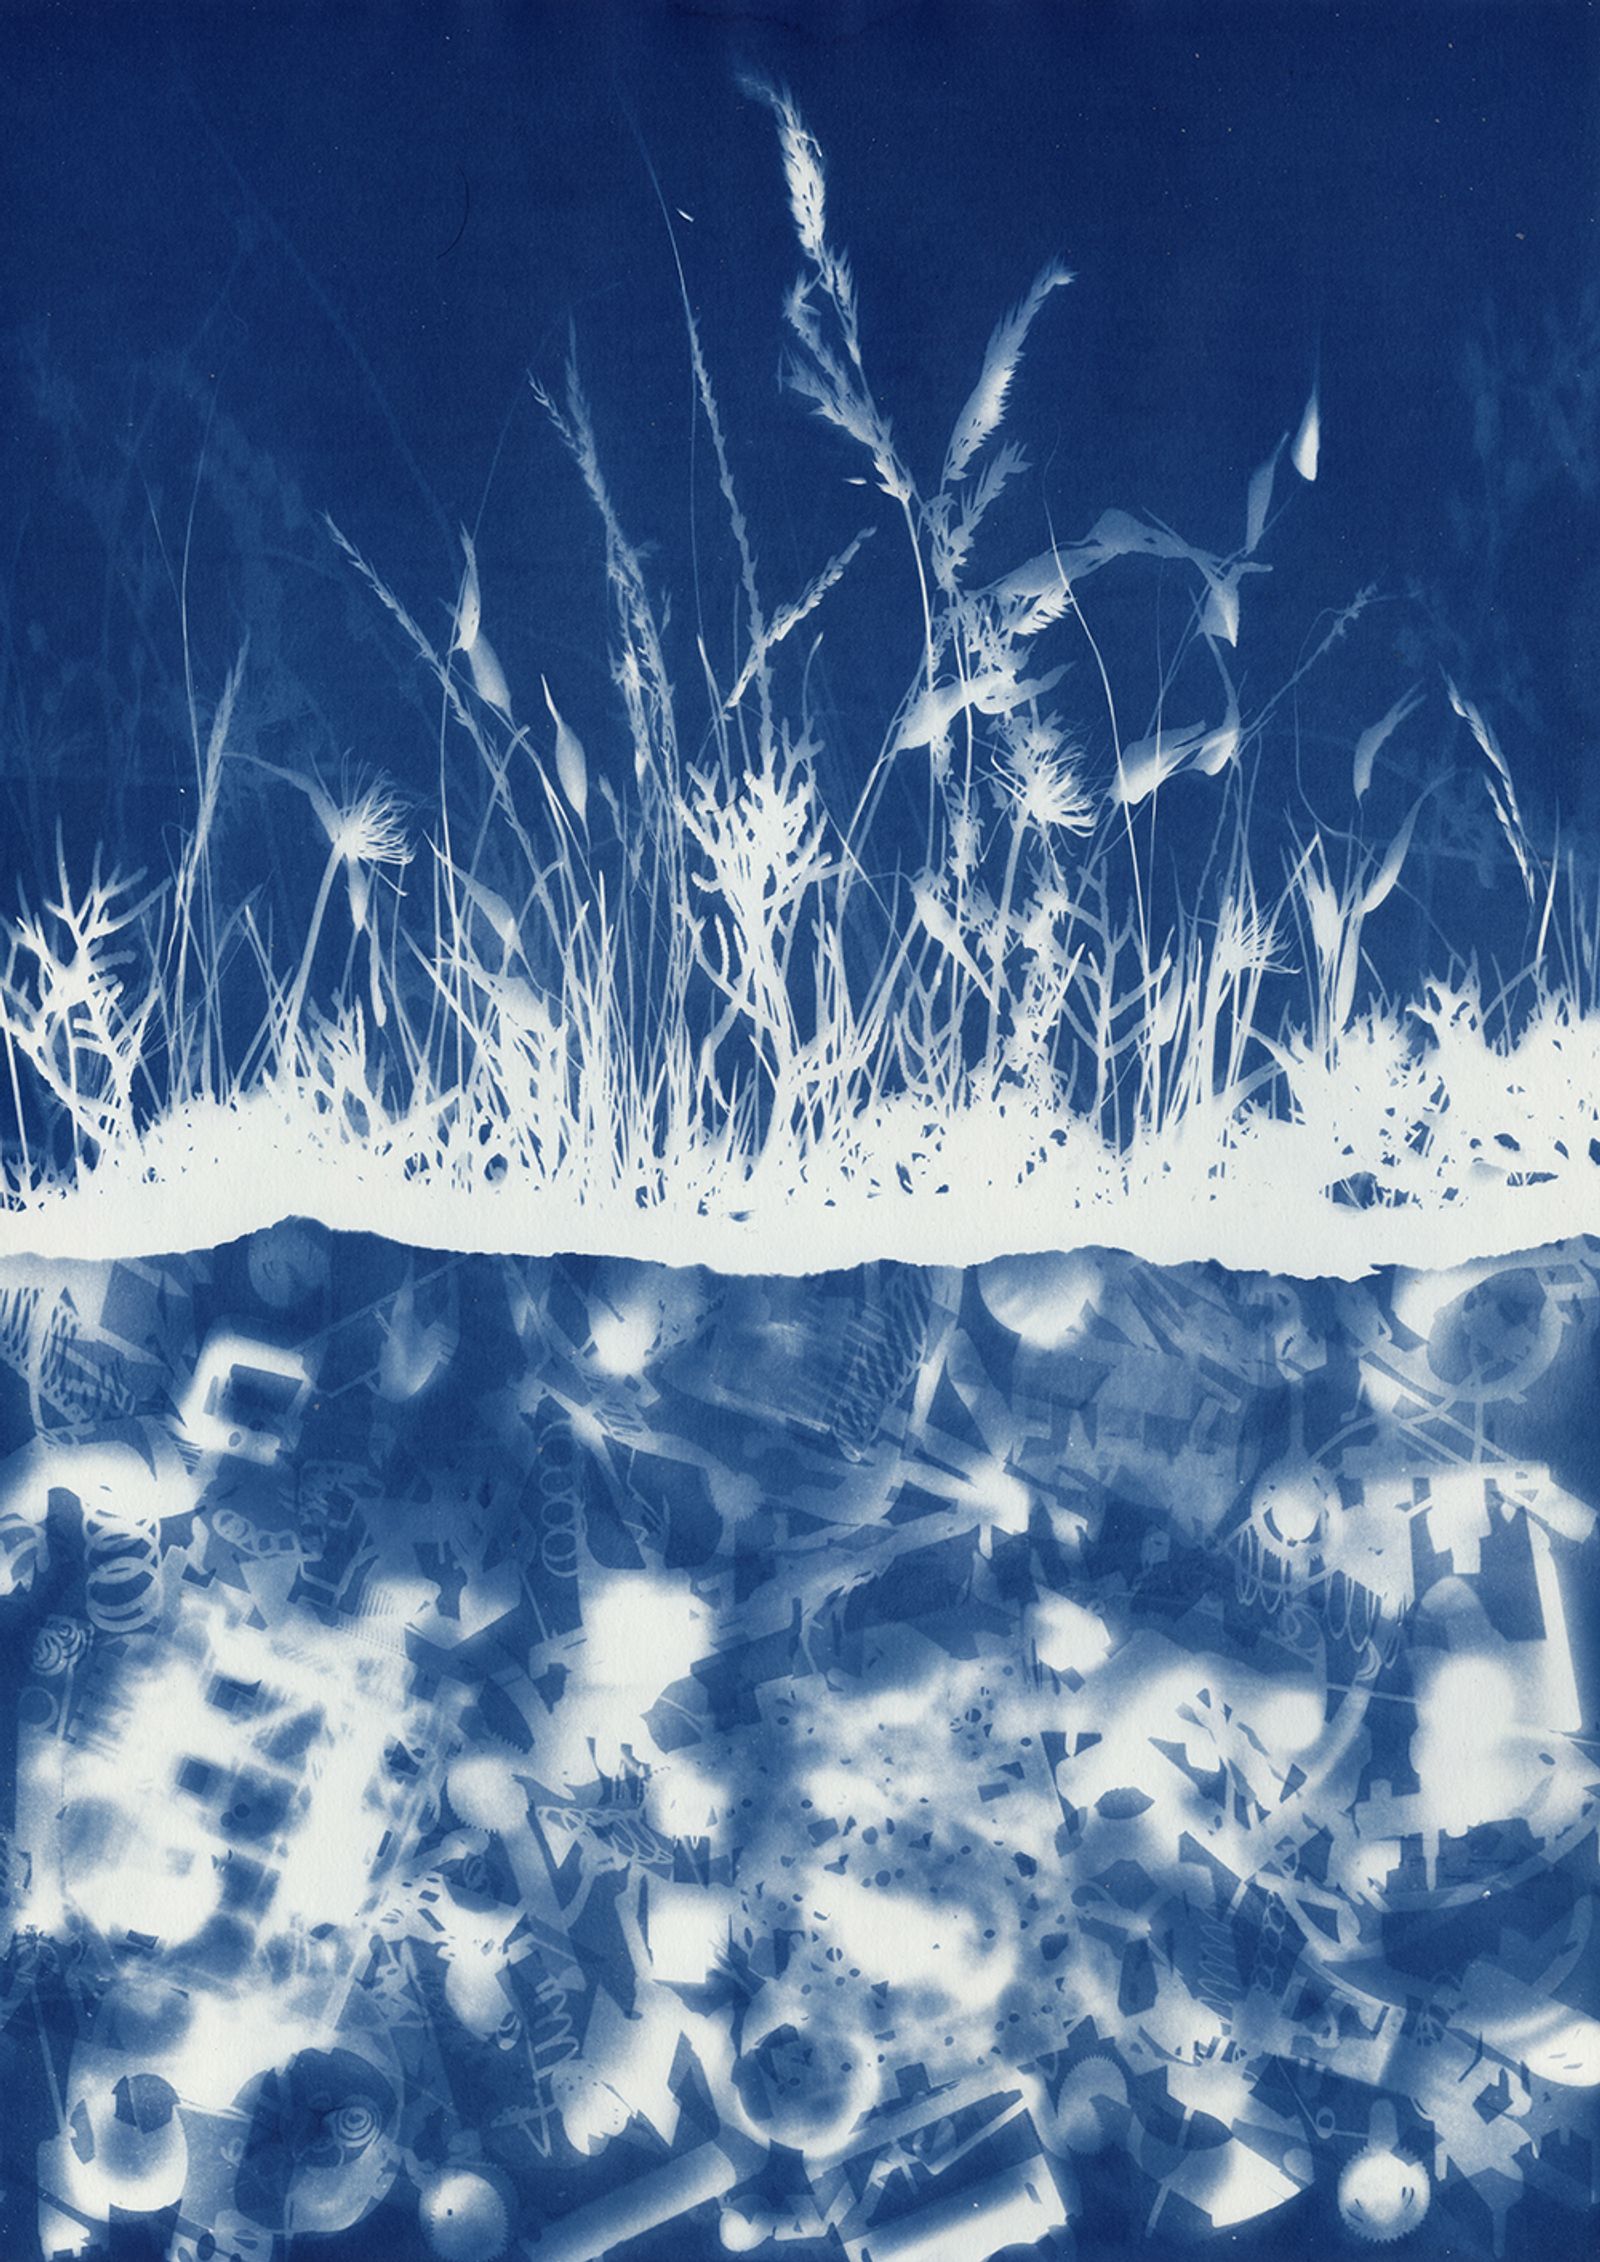 © Miltiadis Igglezos - Image from the Cyanotypes of a trashworld photography project